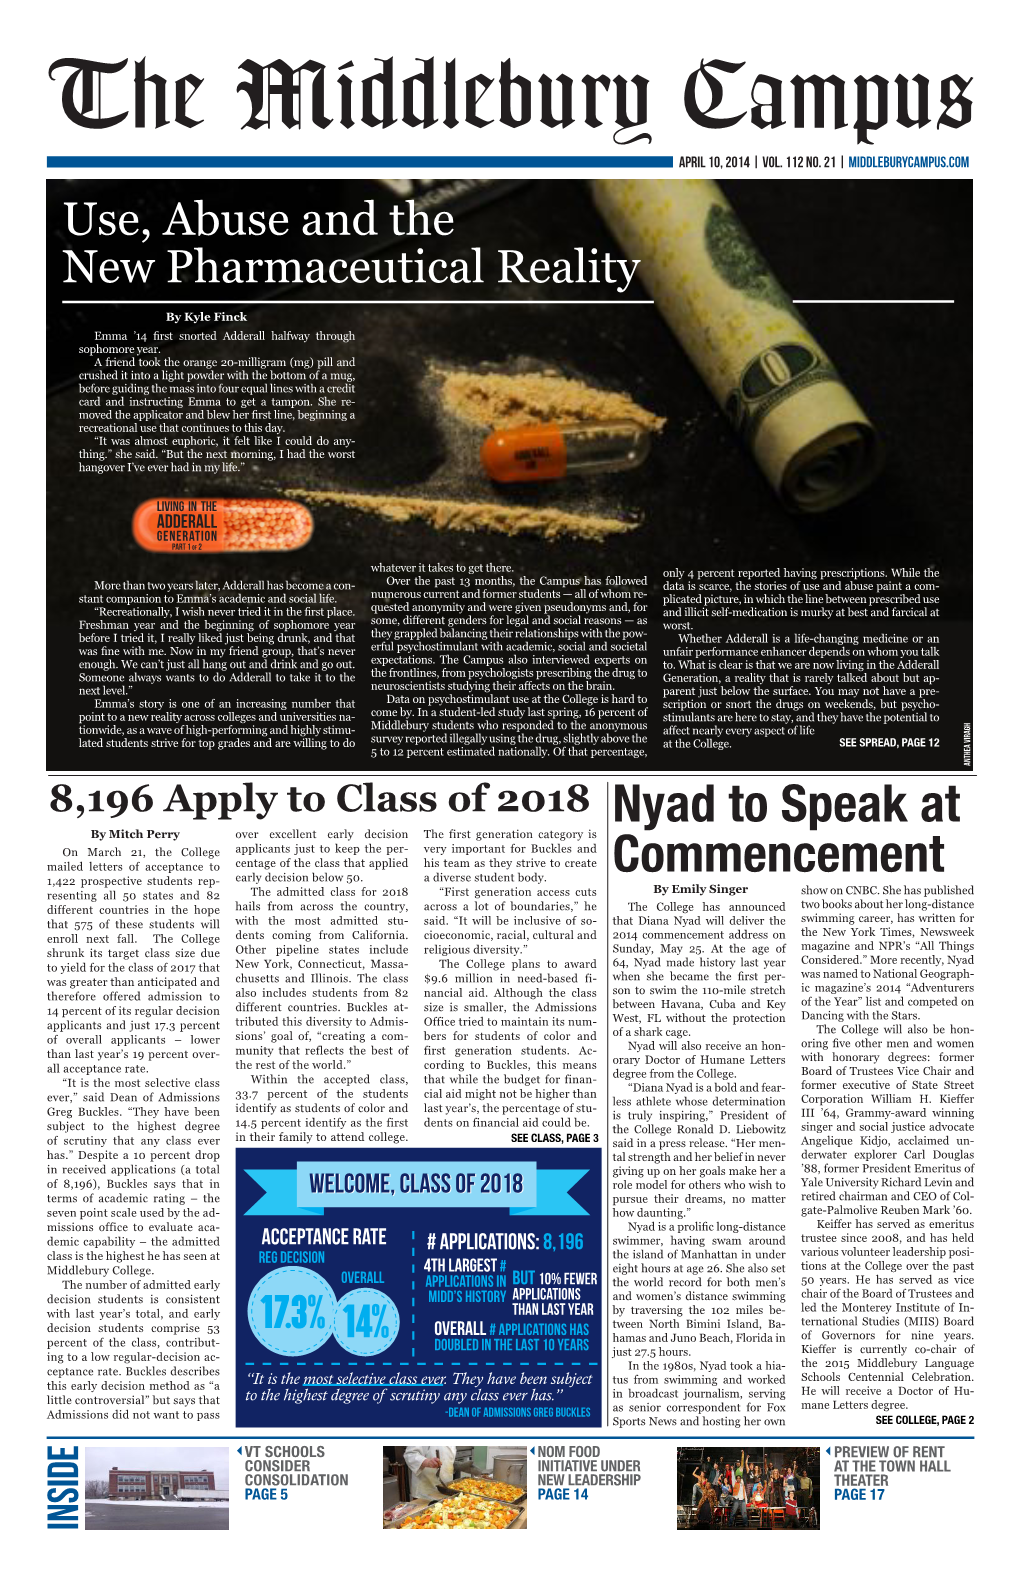 Nyad to Speak at Commencement